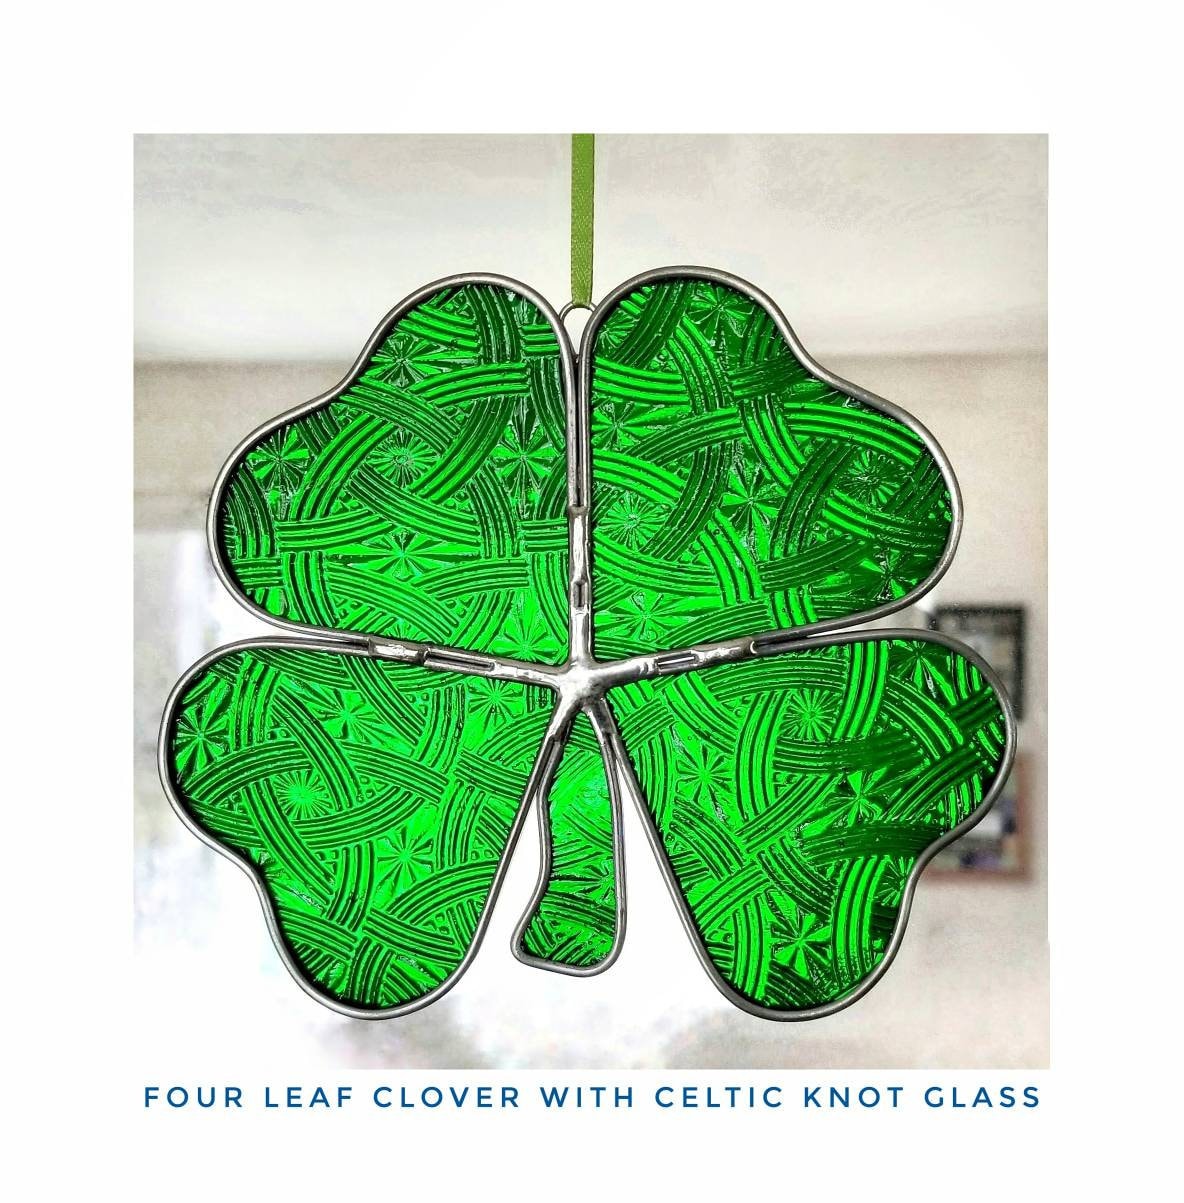 Four Leaf Clover, Window Hanging, Sparkly Green Glass with Repeating Celtic Knots are Textured into the Stained Glass.